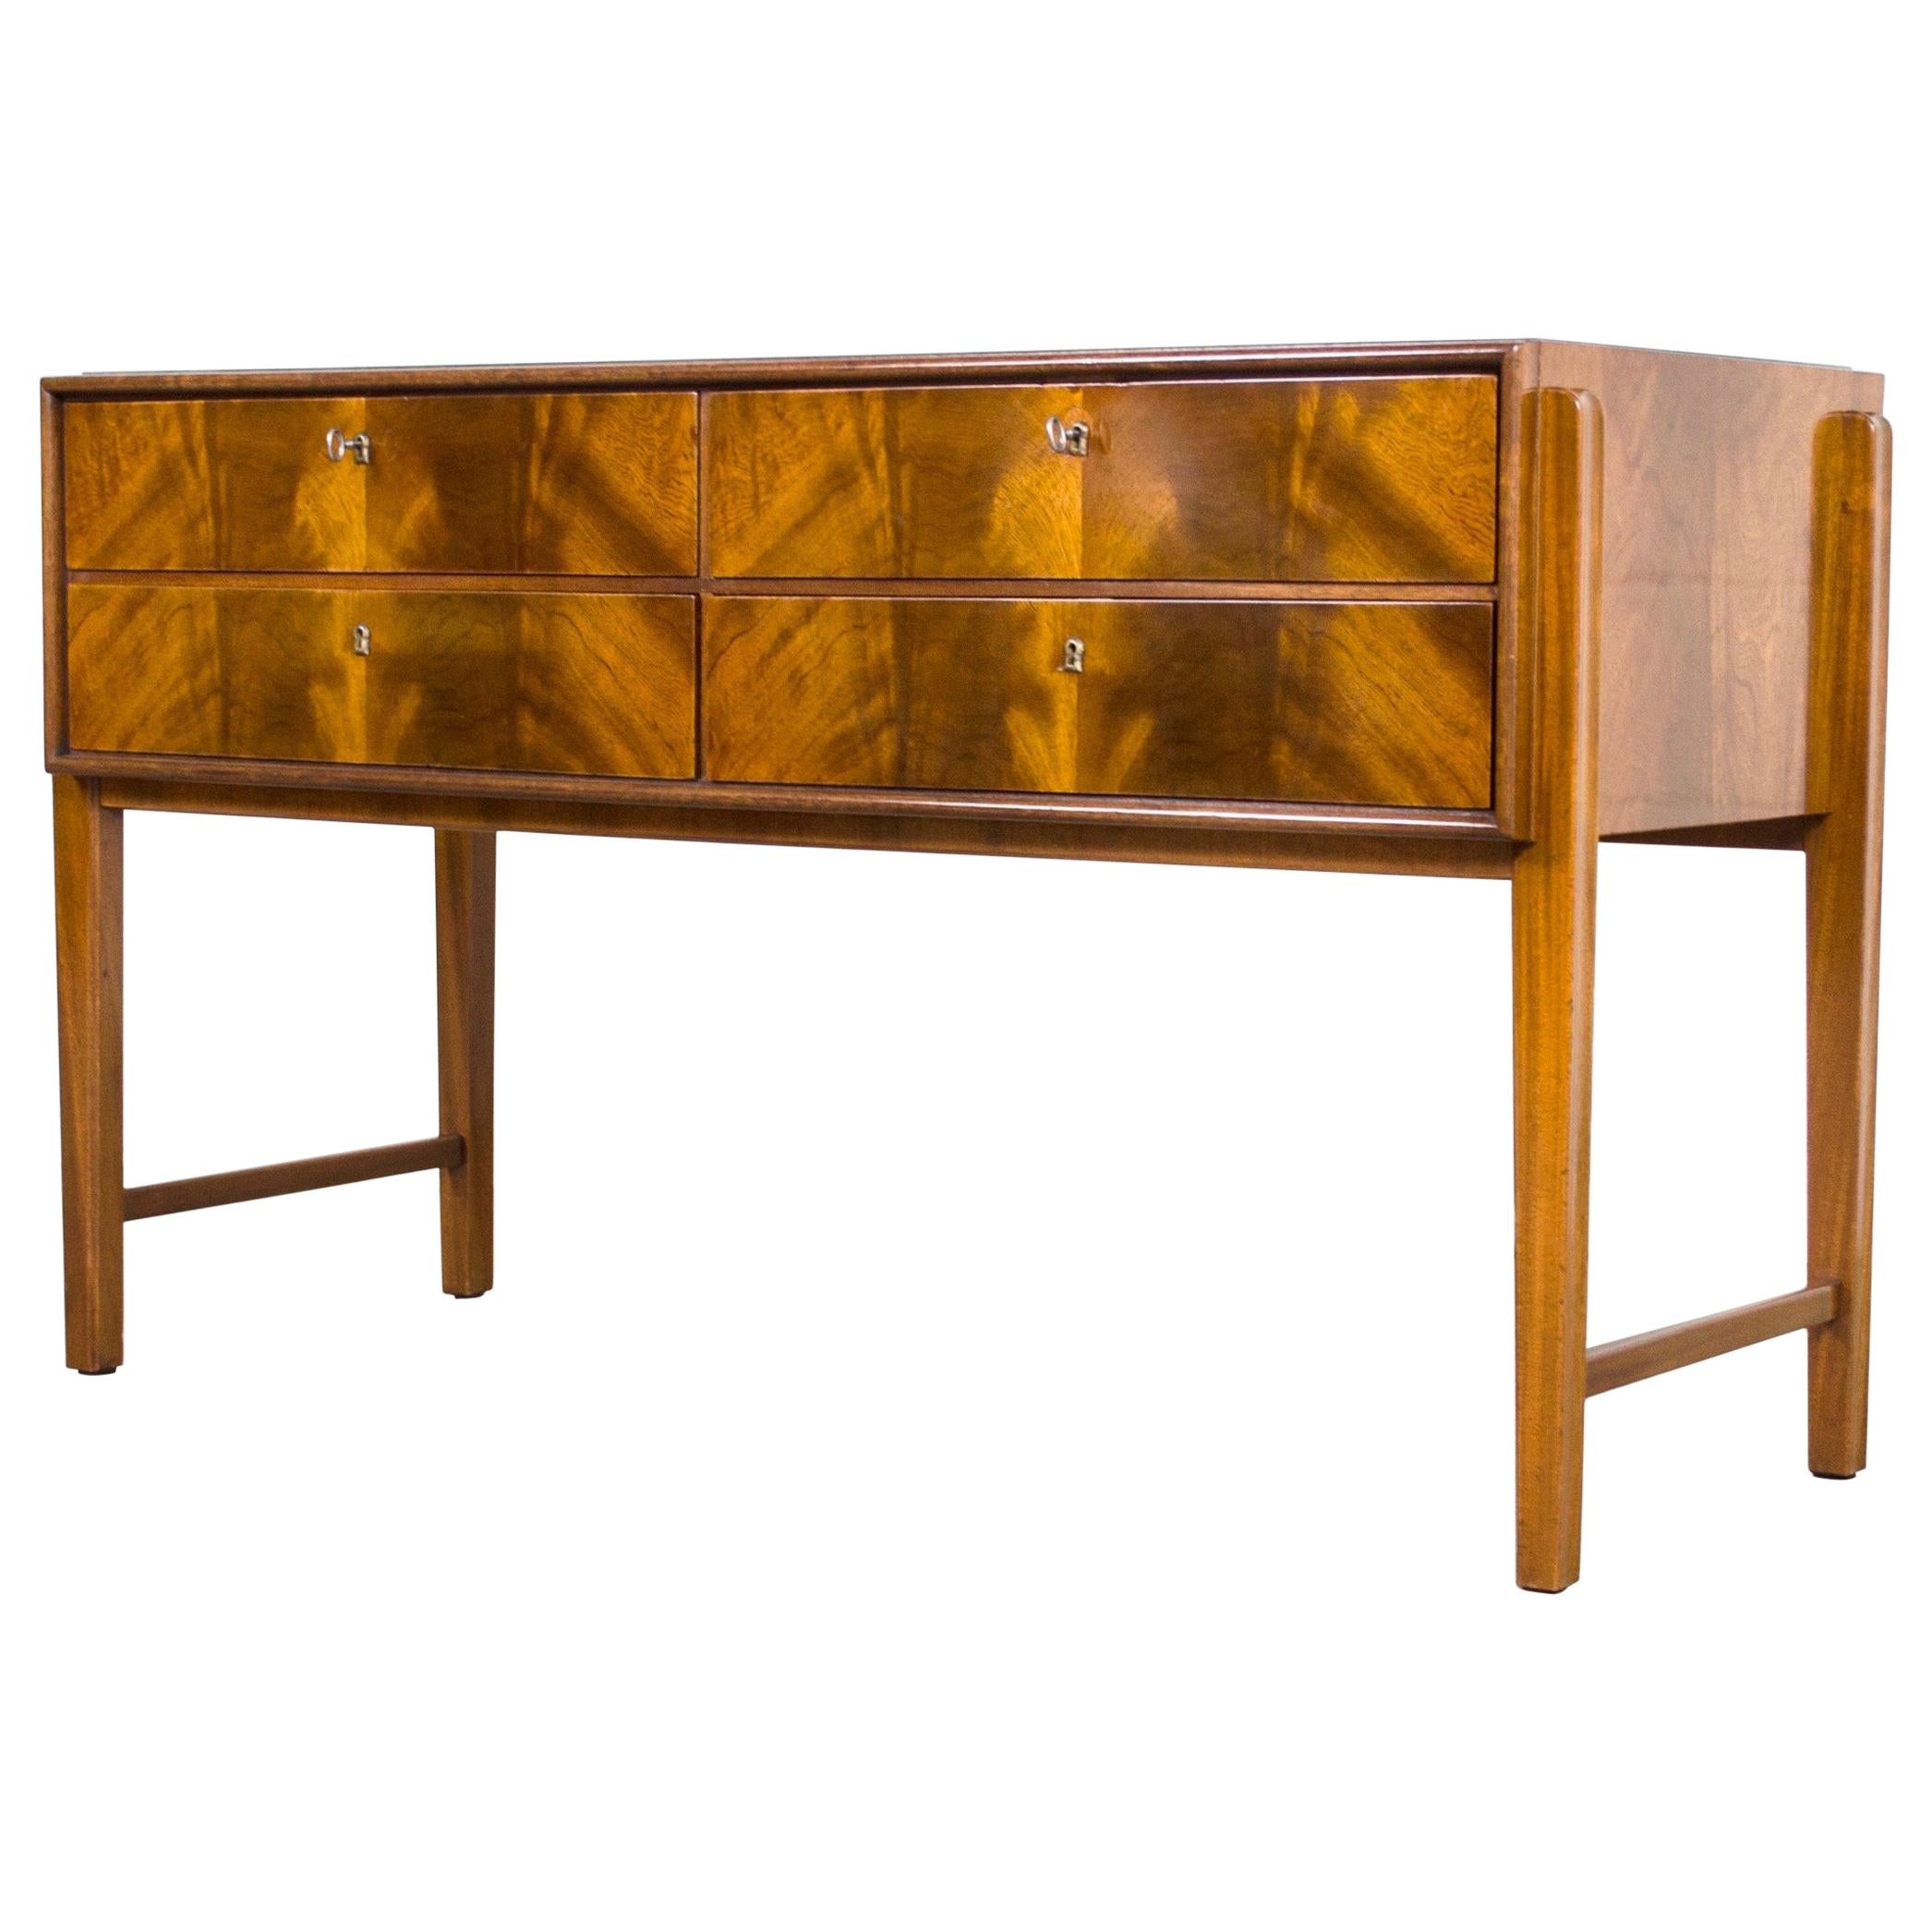 Midcentury Burl Wood Sideboard Credenza with Glass Top, 1960s For Sale